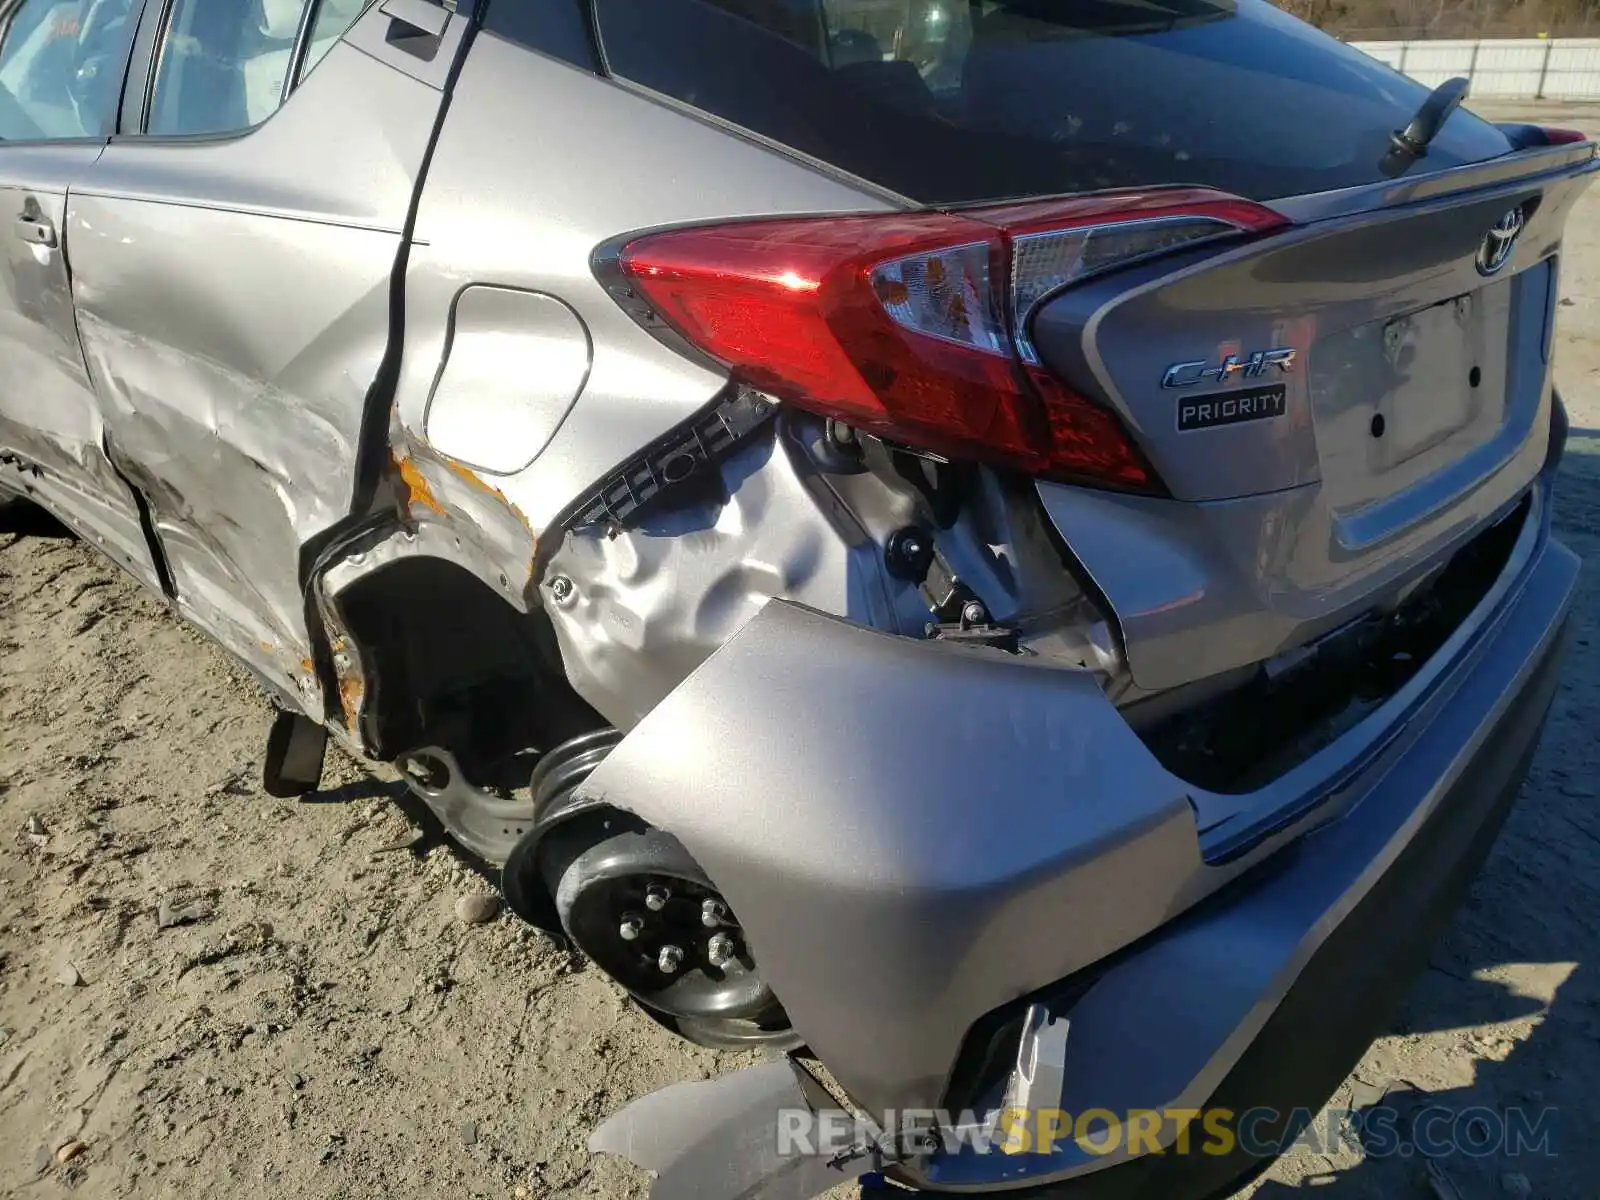 9 Photograph of a damaged car NMTKHMBXXKR097130 TOYOTA C-HR 2019